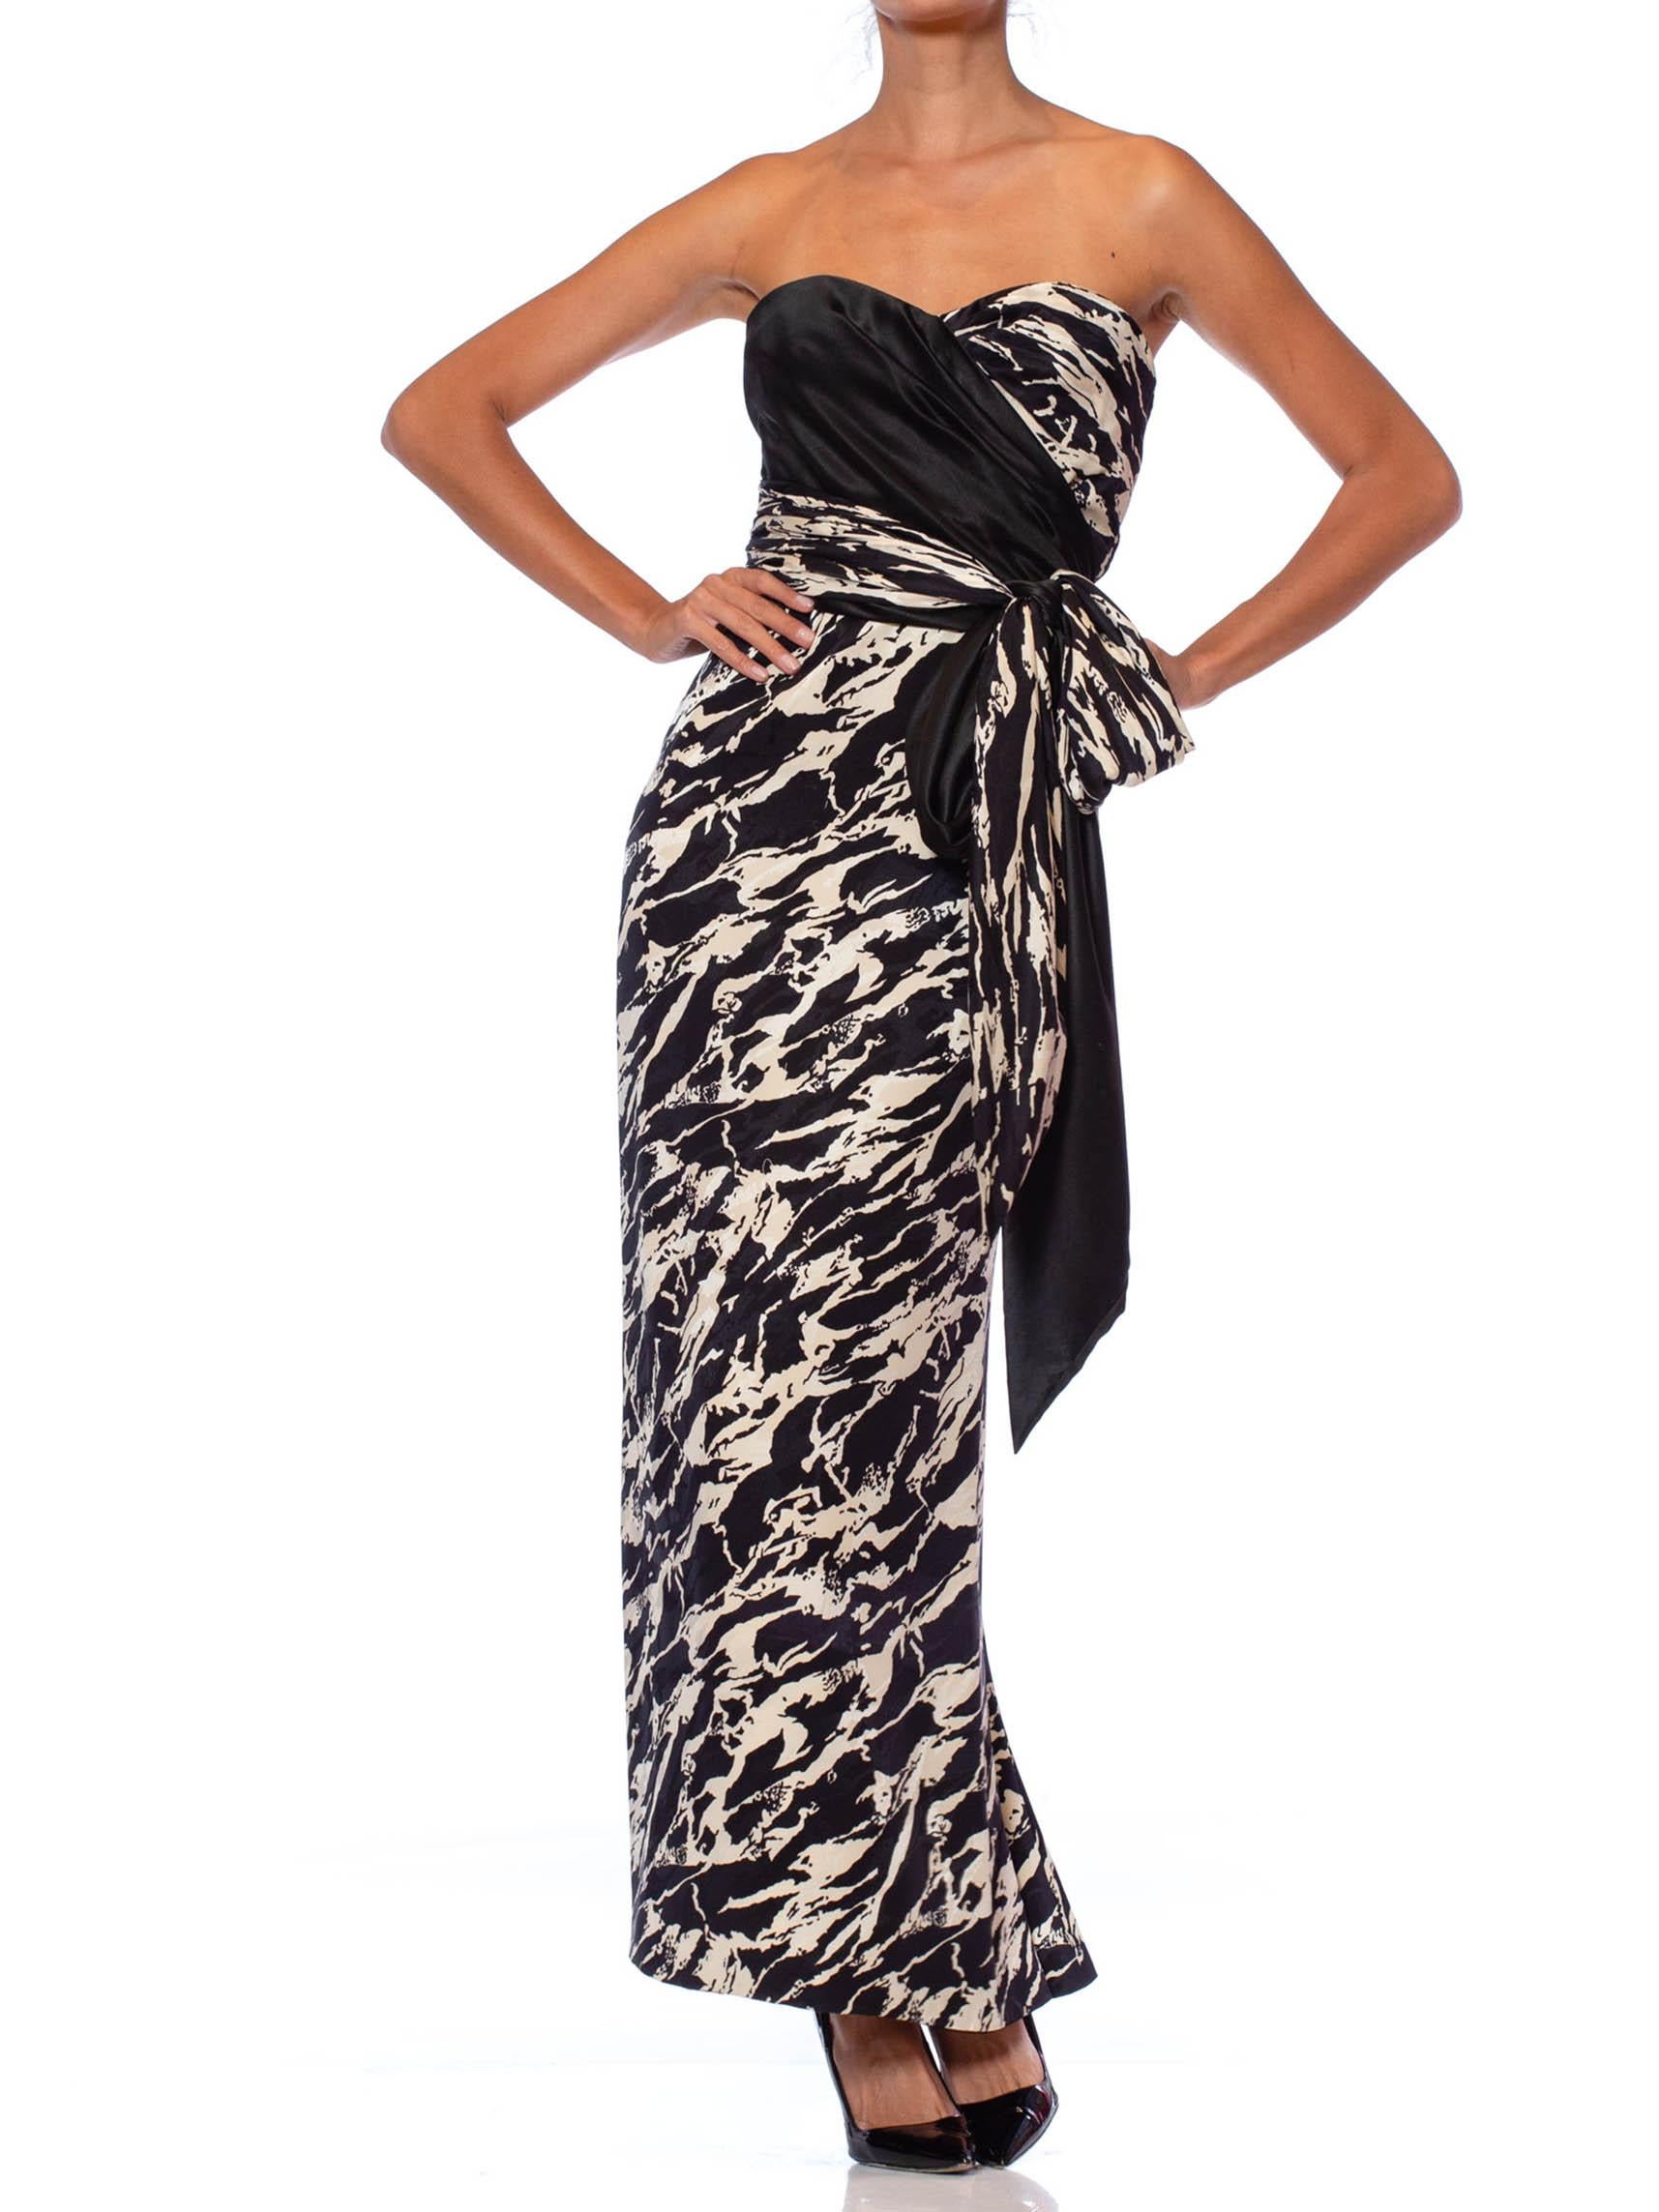 1980S ODICINI COUTURE FOR FRED HAYMAN BEVERLY HILLS Black & White Silk Charmeuse Strapless Gown